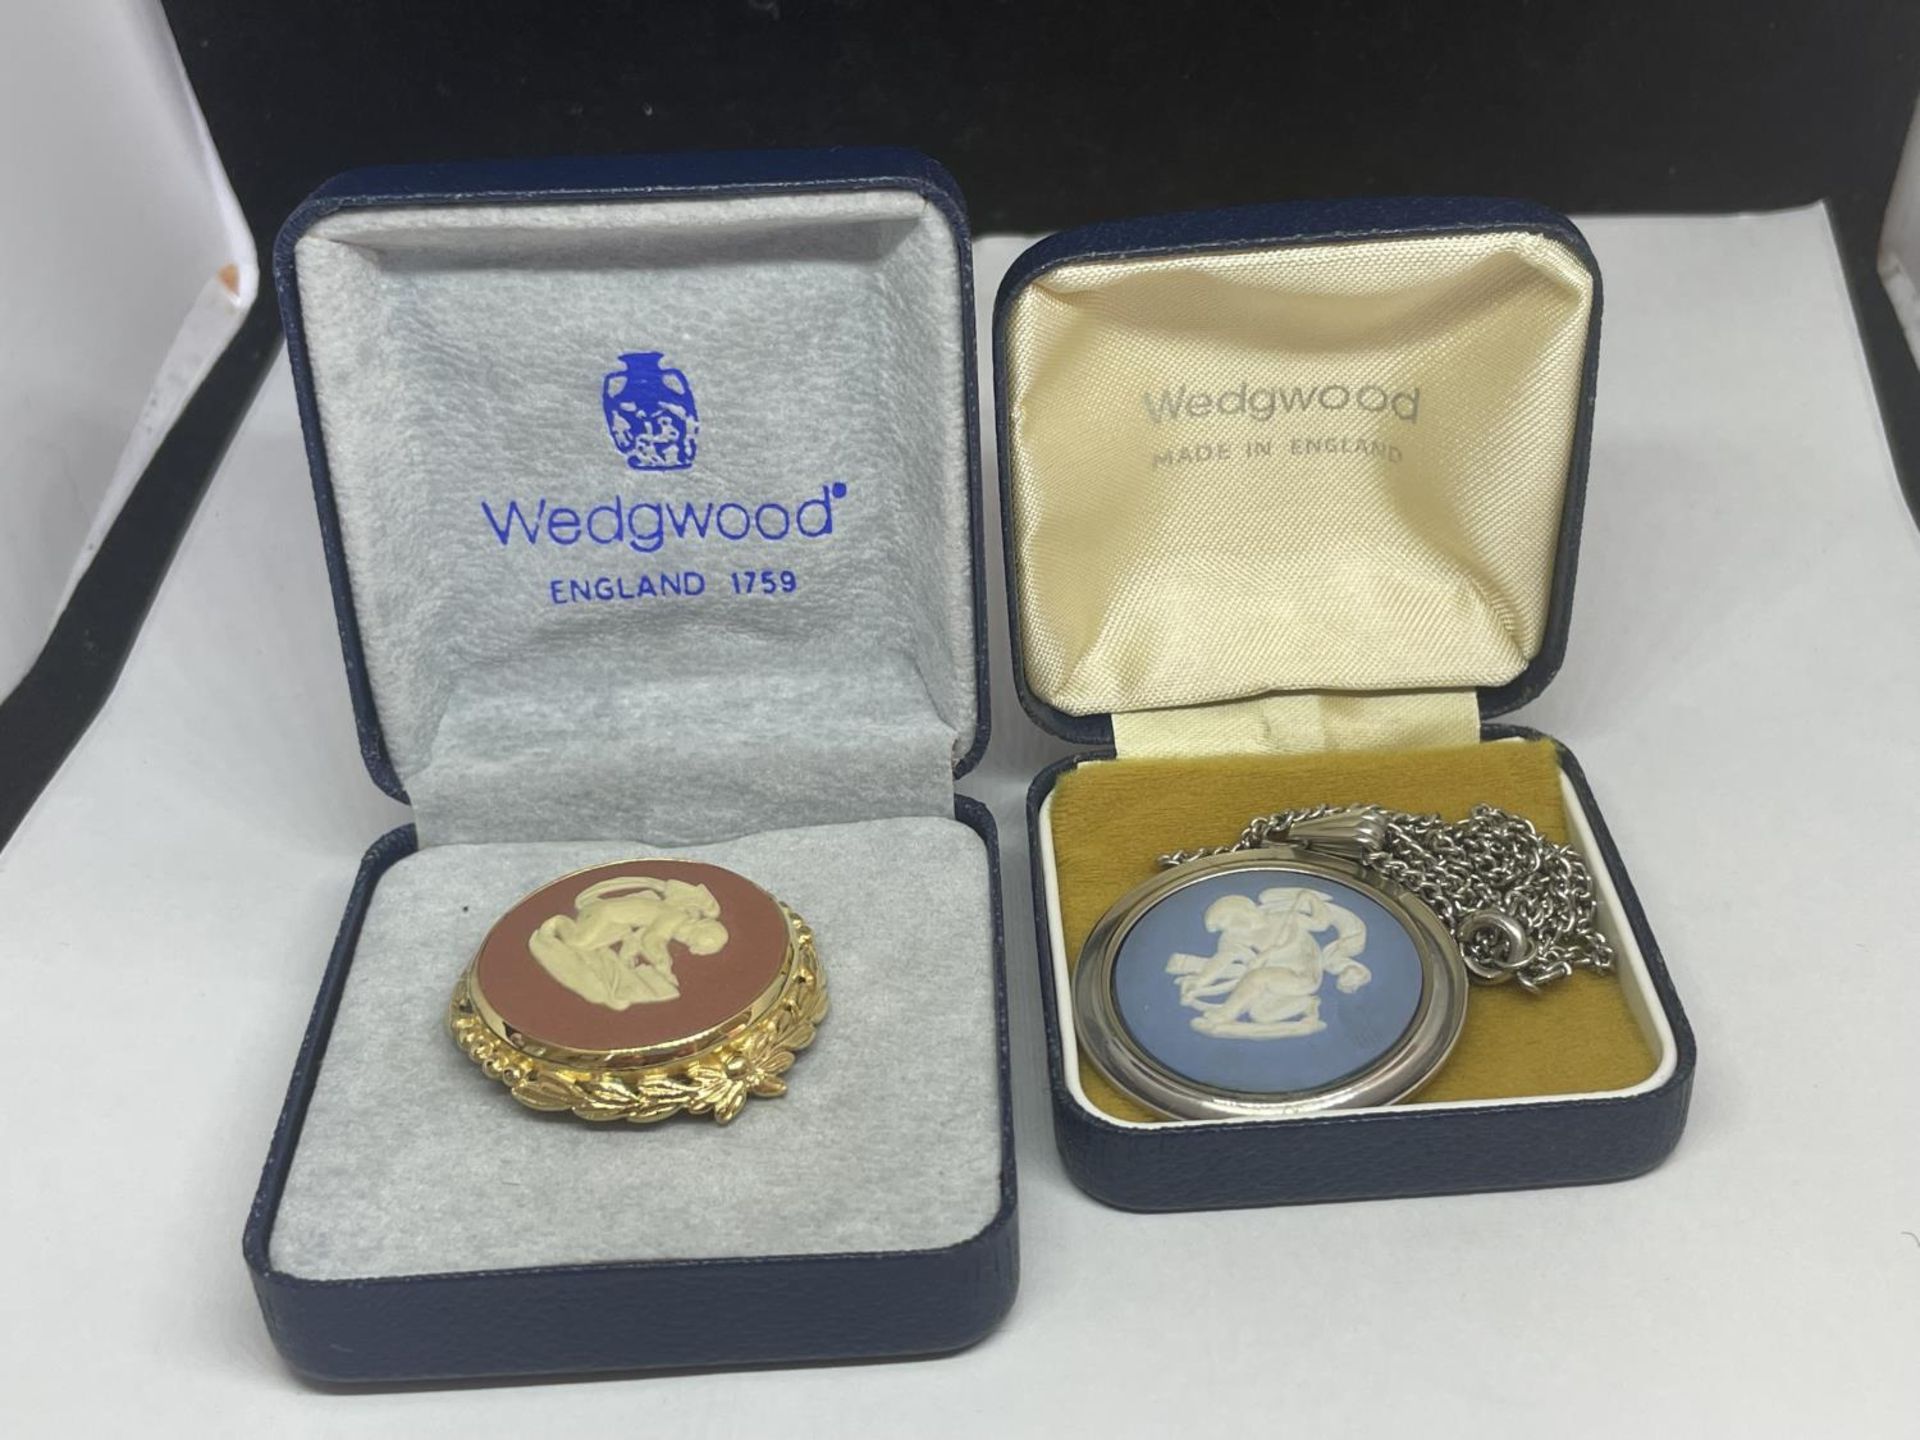 TWO BOXED WEDGWOOD JASPER WARE ITEMS TO INCLUDE A PINK BROOCH AND A BLUE PENDANT